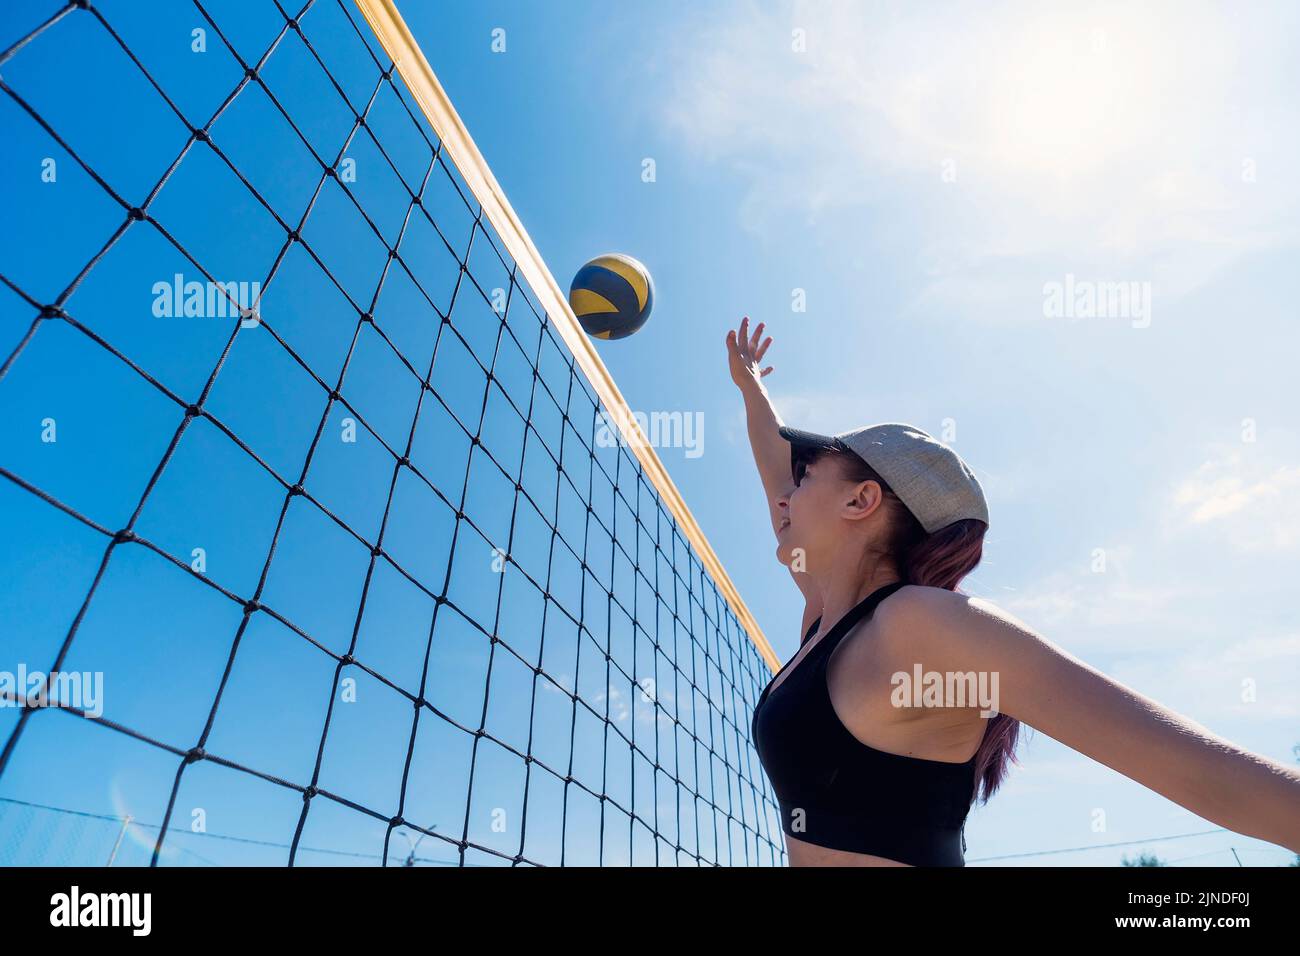 Girl athlete jumping in front of the yellow net for the ball while playing volleyball. Blocking the ball. Beach volleyball in the open air. Stock Photo